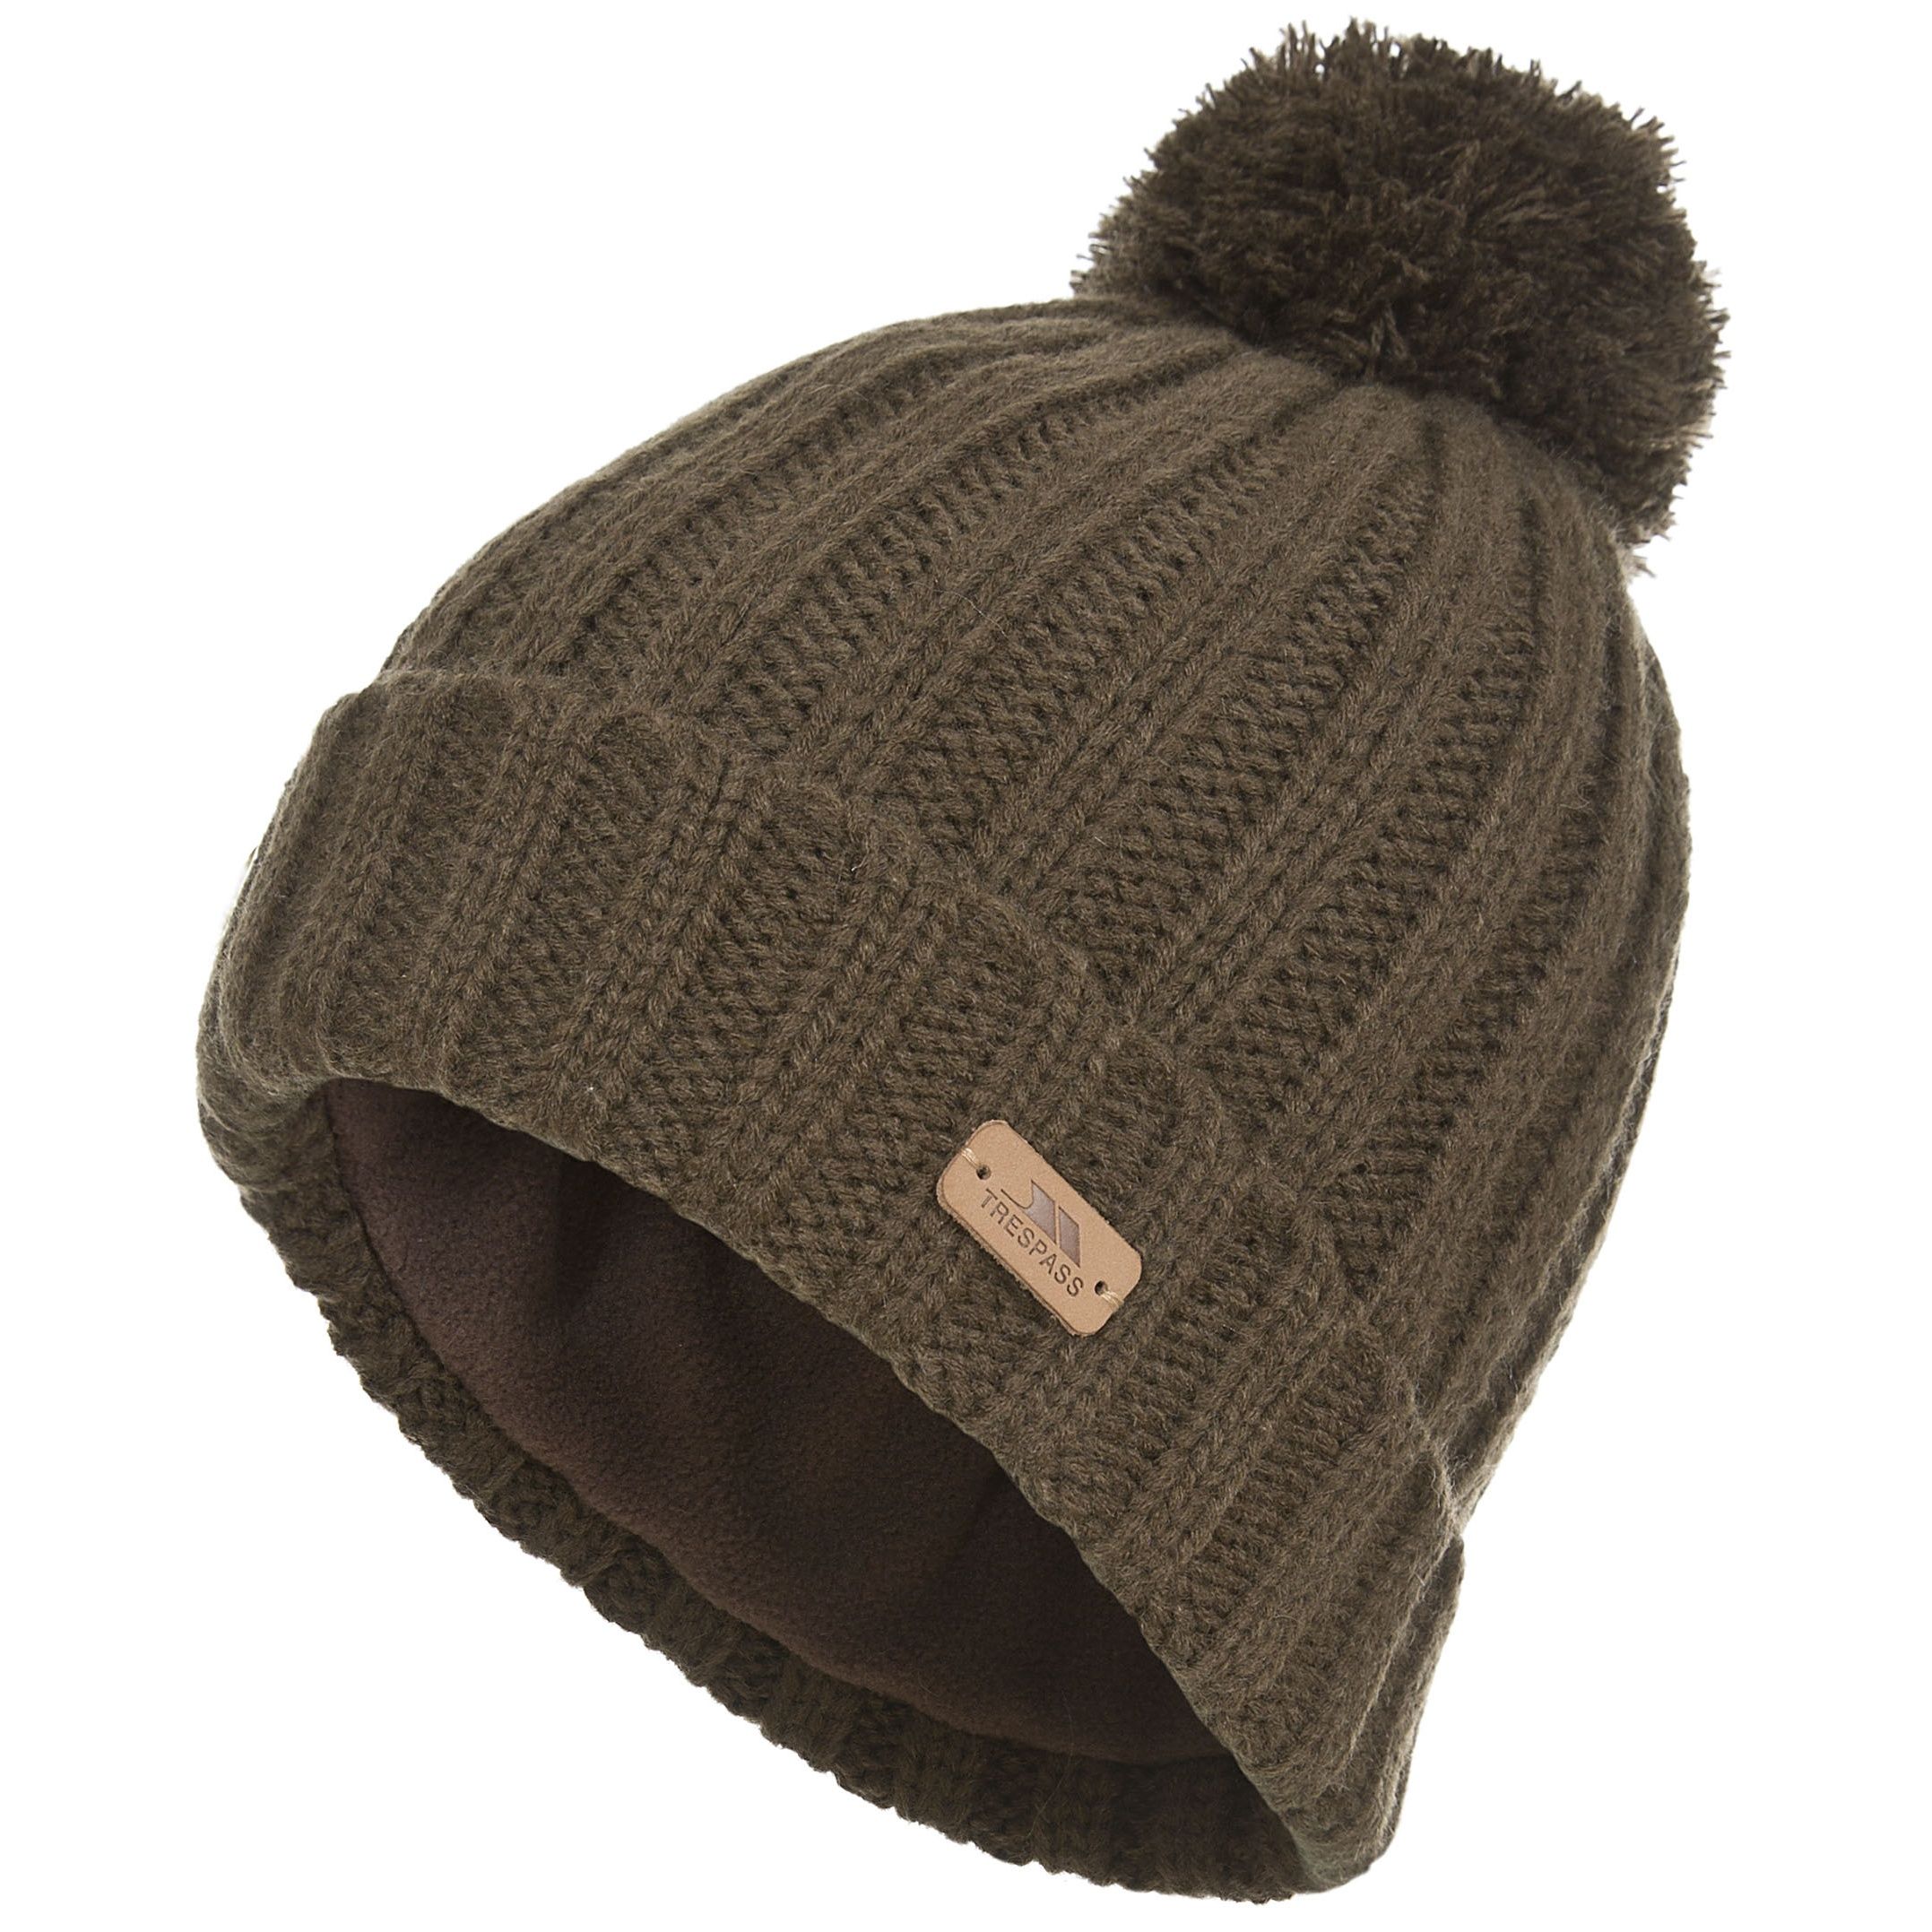 Outer: 100% Acrylic, Lining: 100% Polyester Anti Pil Fleece. Round off your look and shield yourself against the chill with the Thorns mens knitted beanie hat. Fully fleece lined.